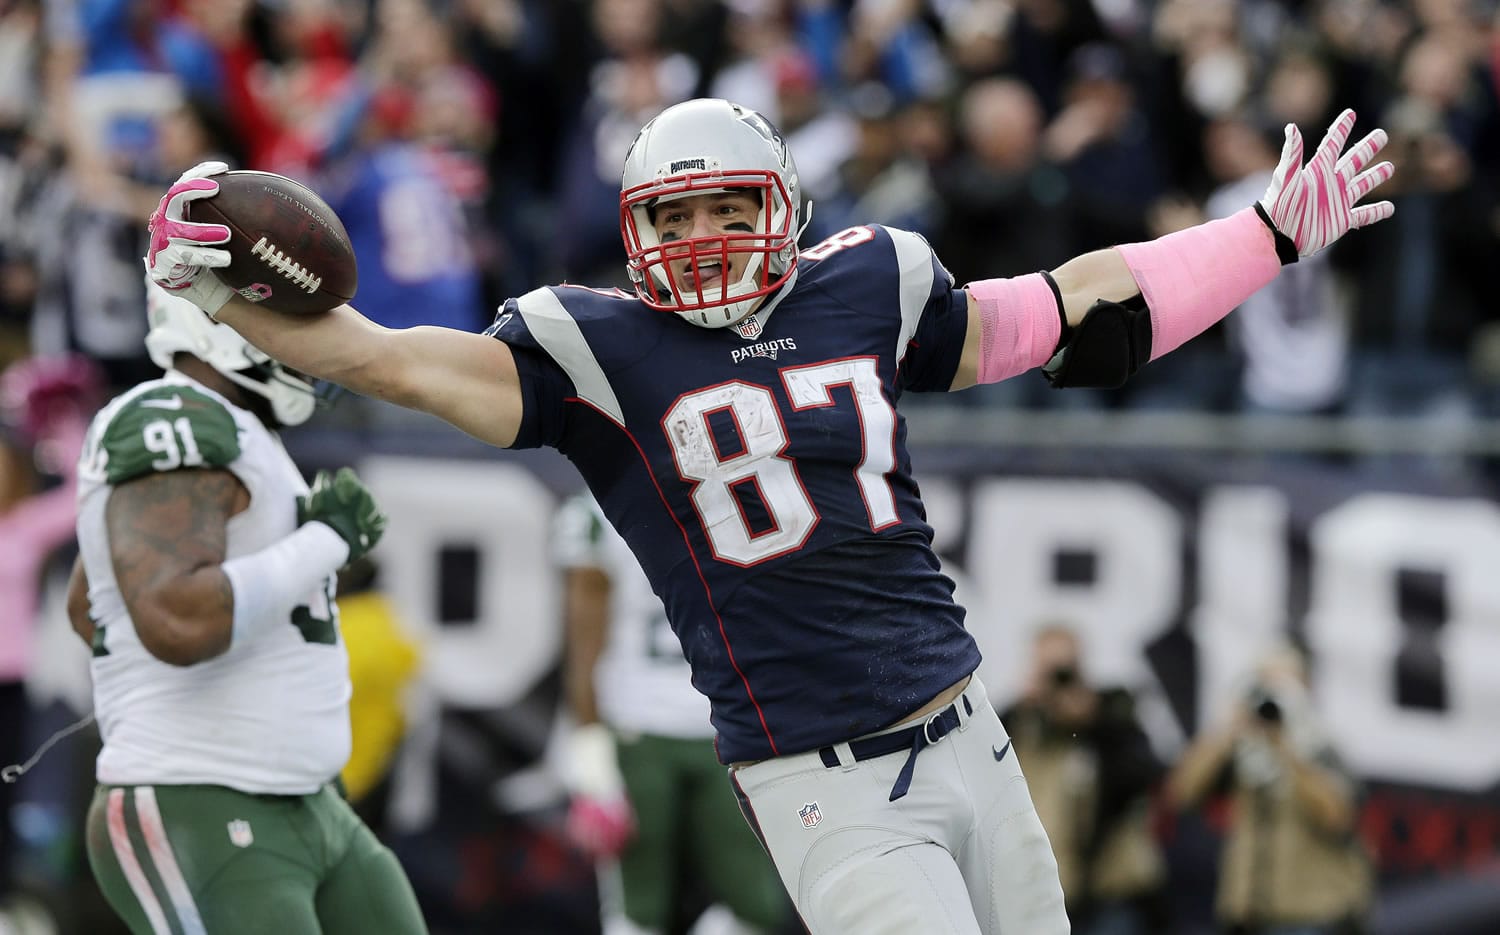 New England Patriots tight end Rob Gronkowski (87) celebrates his touchdown catch during the fourth quarter against the New York Jets, Sunday, Oct. 25, 2015, in Foxborough, Mass.